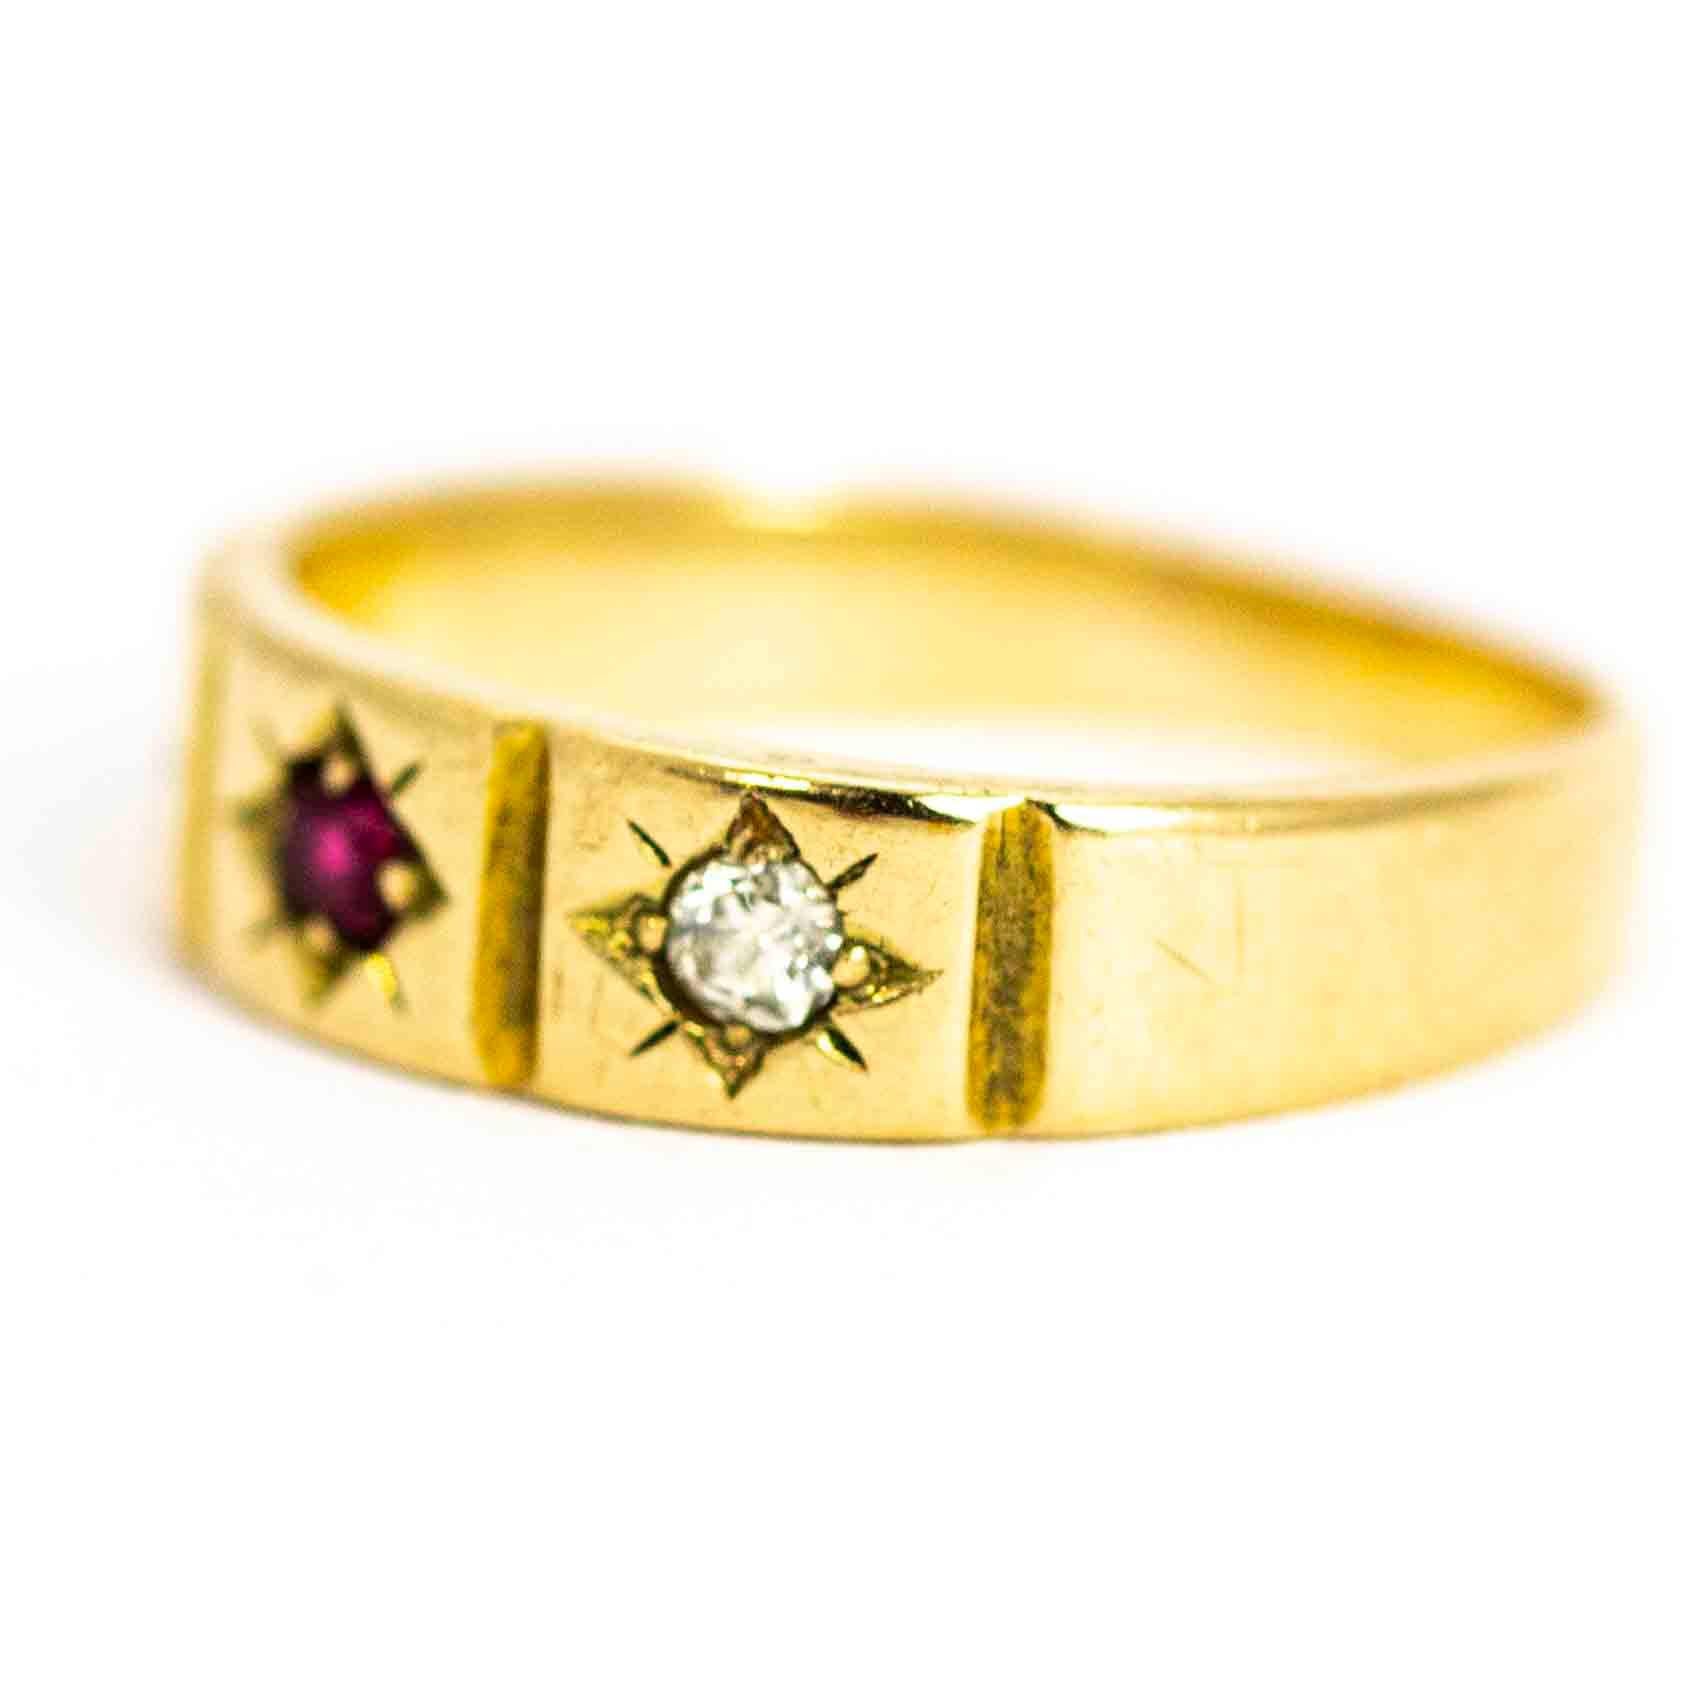 A beautiful antique mid-Victorian three-stone ring. Set with a central round ruby flanked by old European cut white diamonds measuring approximately 5 points each.  The stones each sit in fine chased panels. Modelled in 15 carat yellow gold. Fully